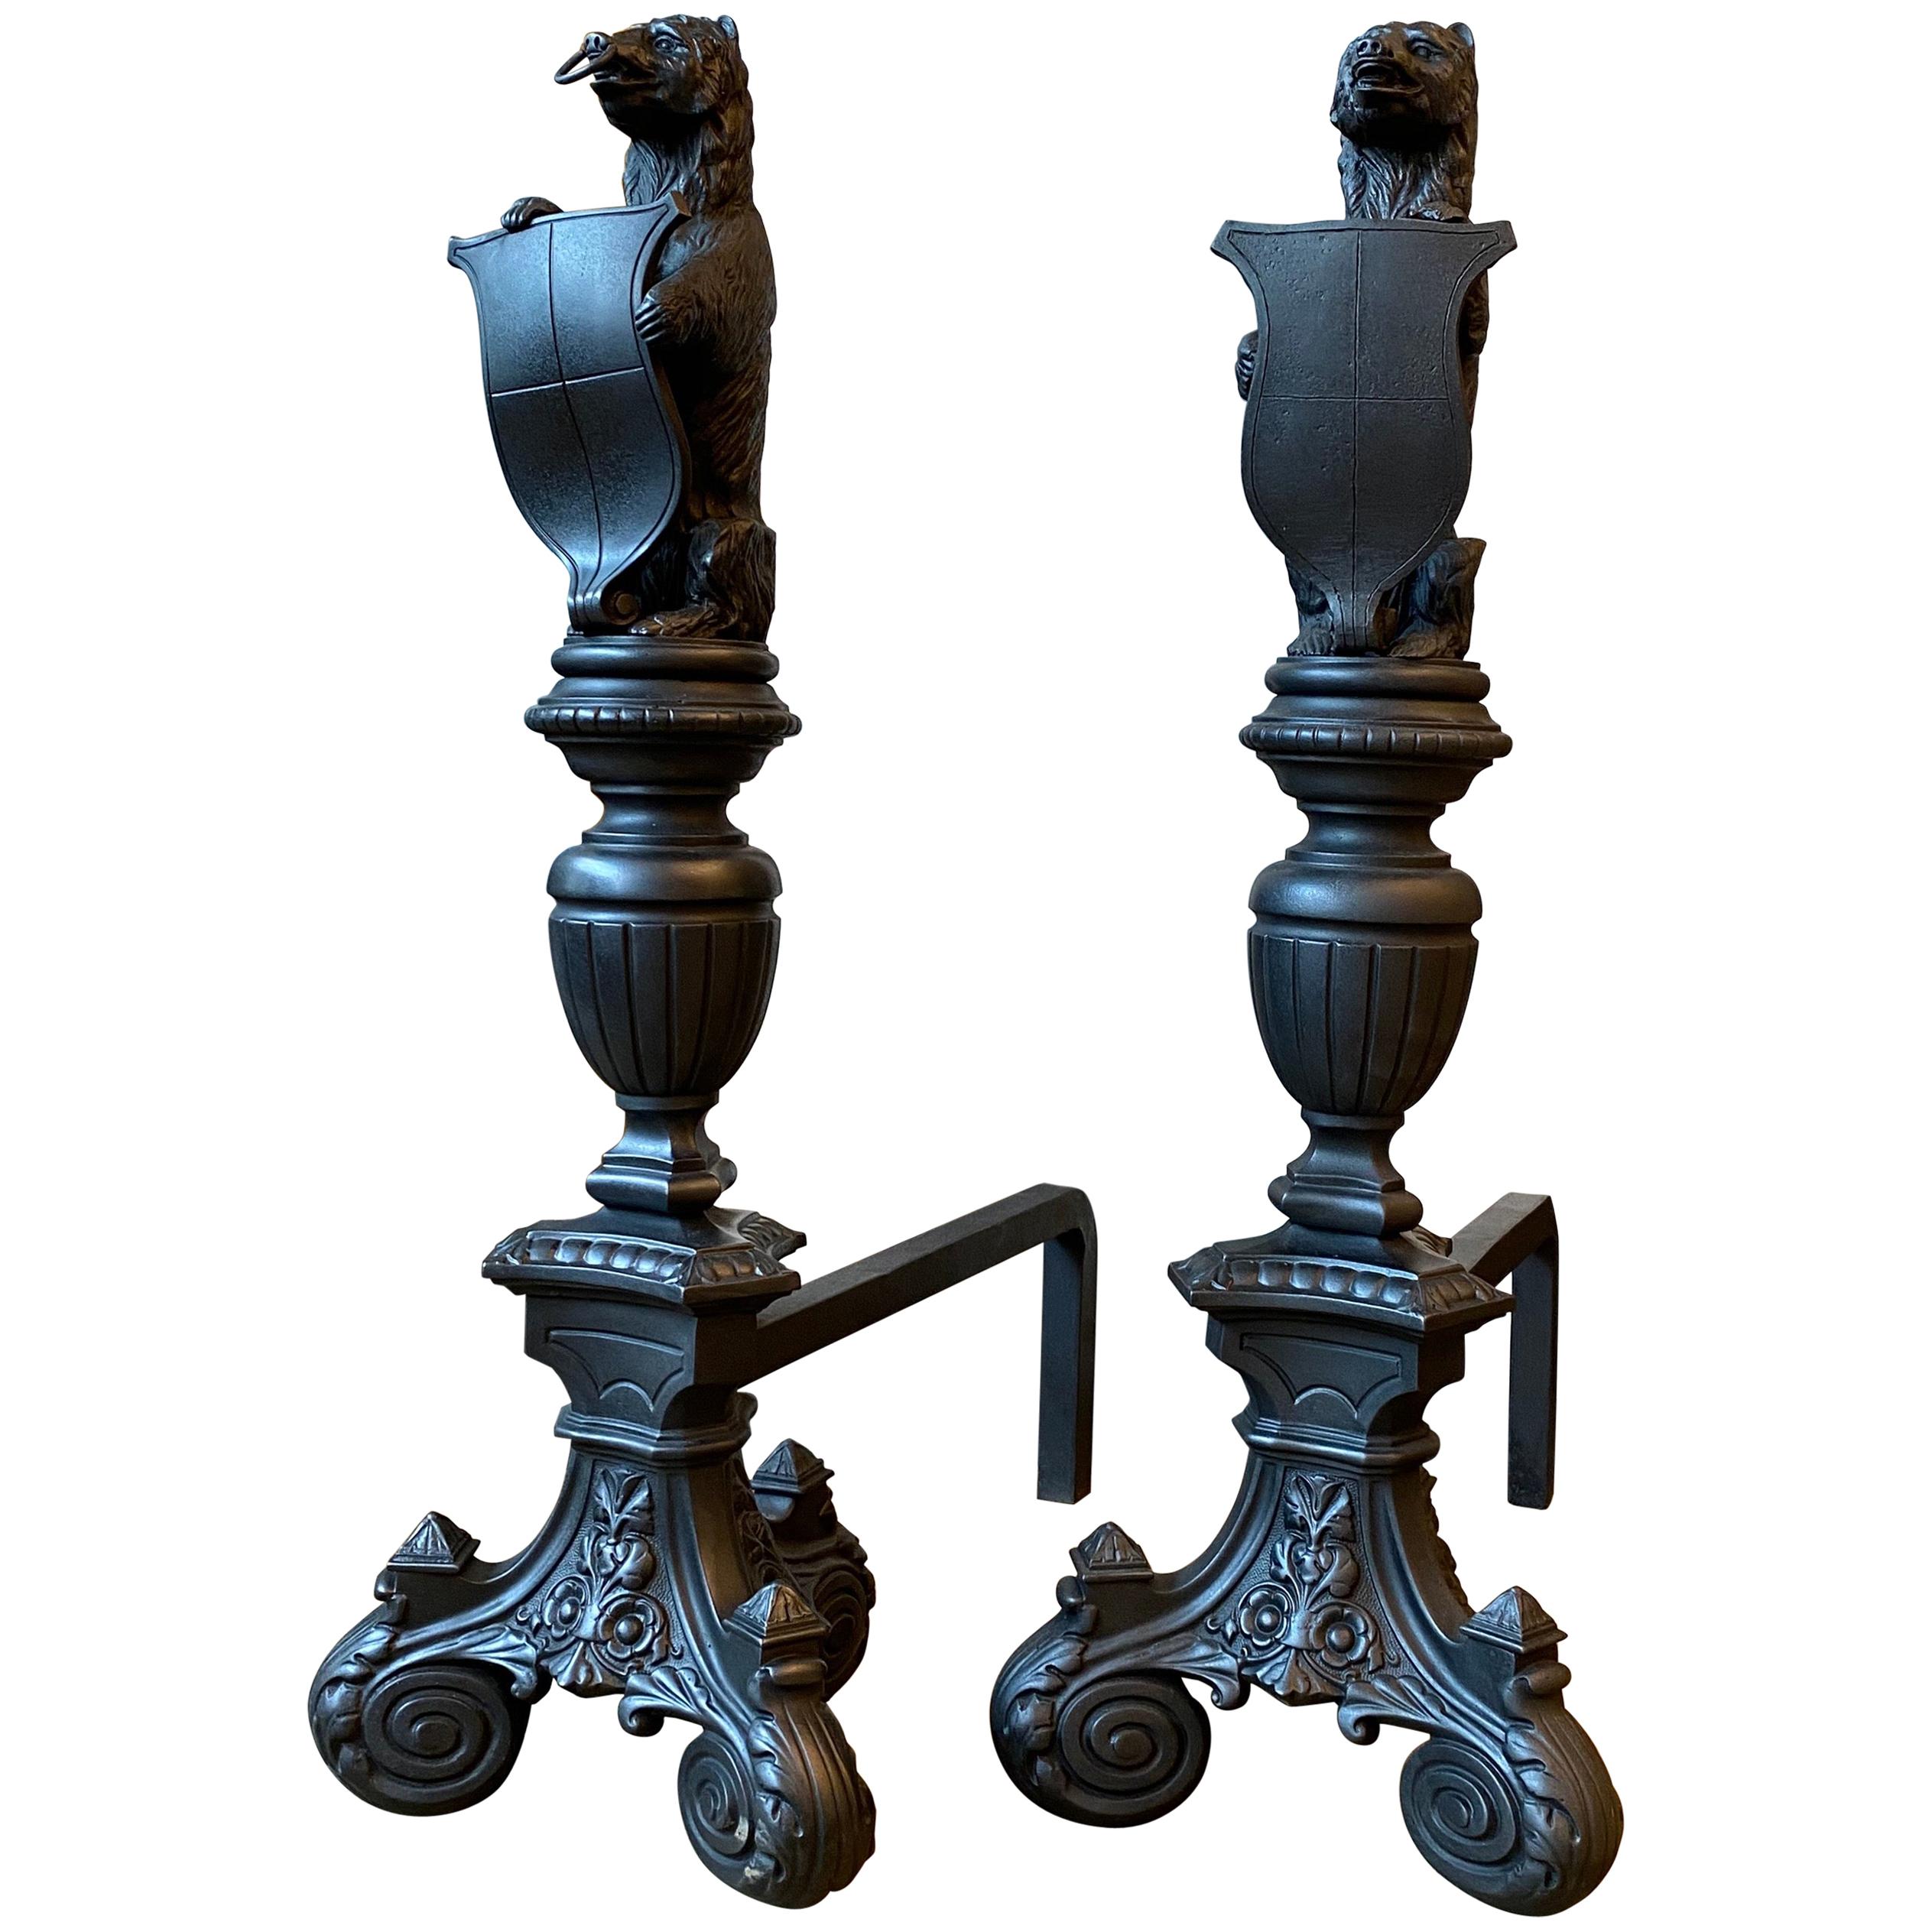 Pair of Tall Antique Cast Iron Fire Dogs For Sale